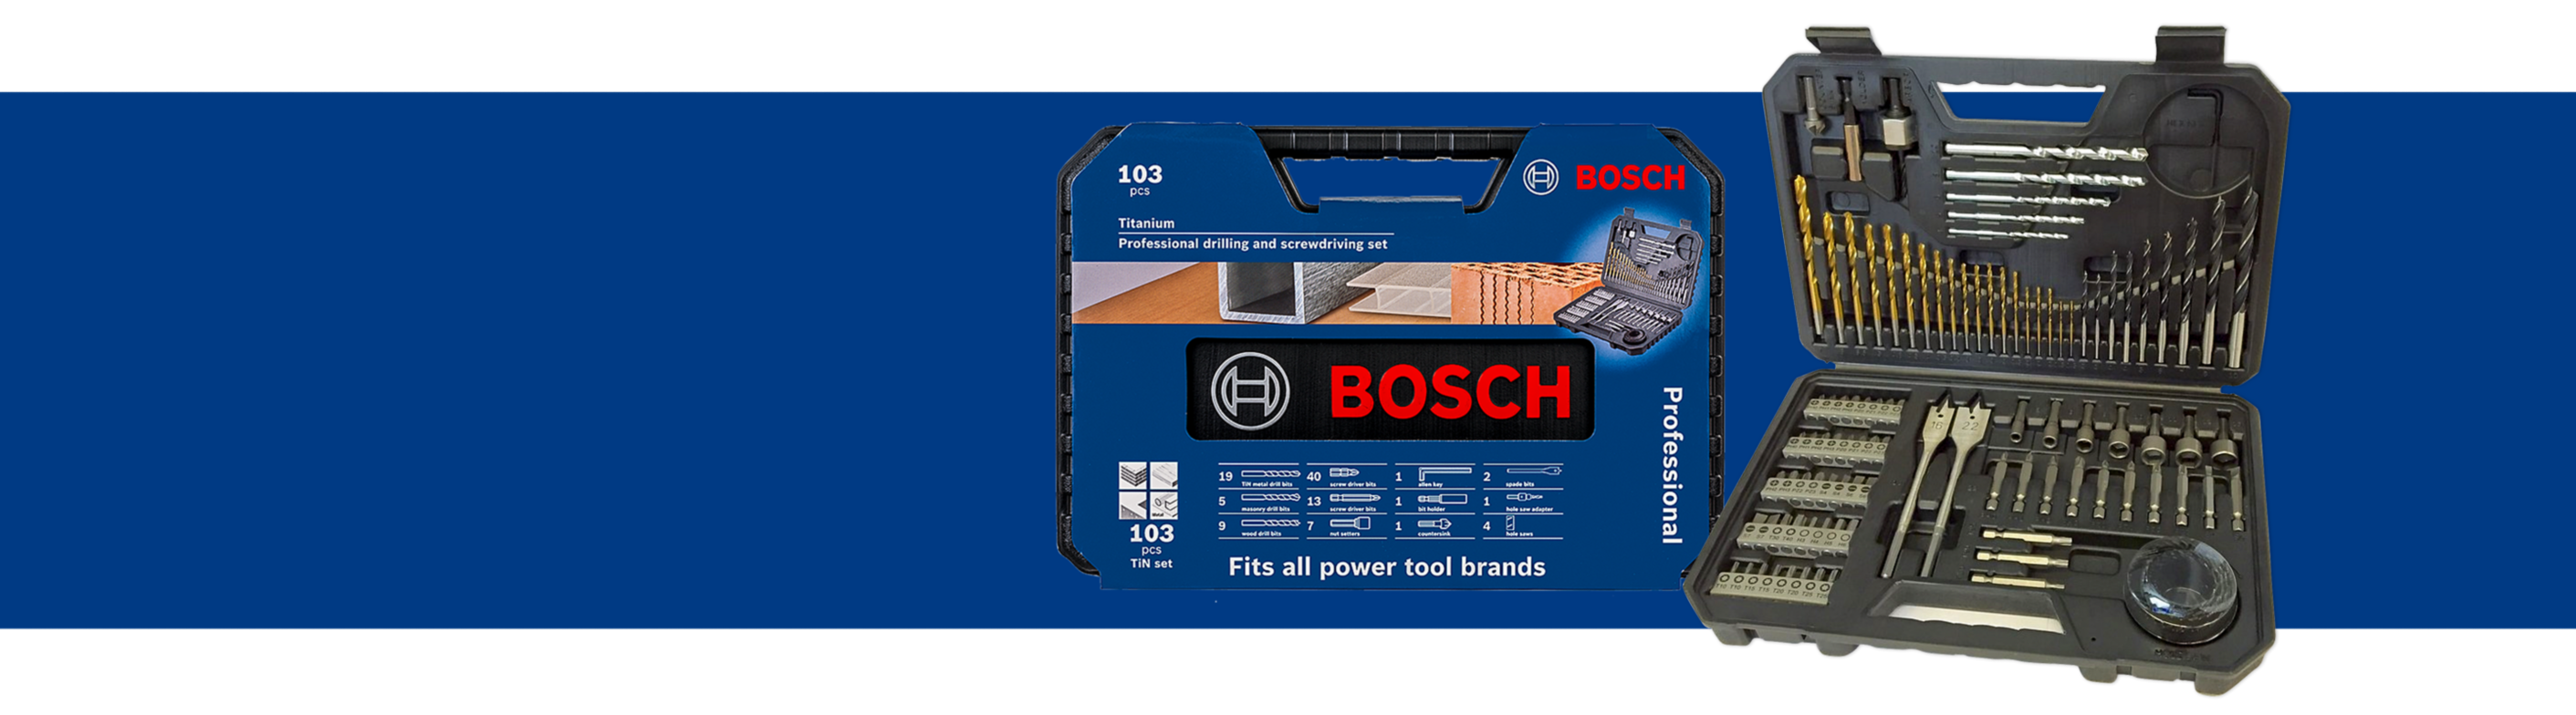 Save 39% on this Bosch Drill & Screwdriving Set 103pcs